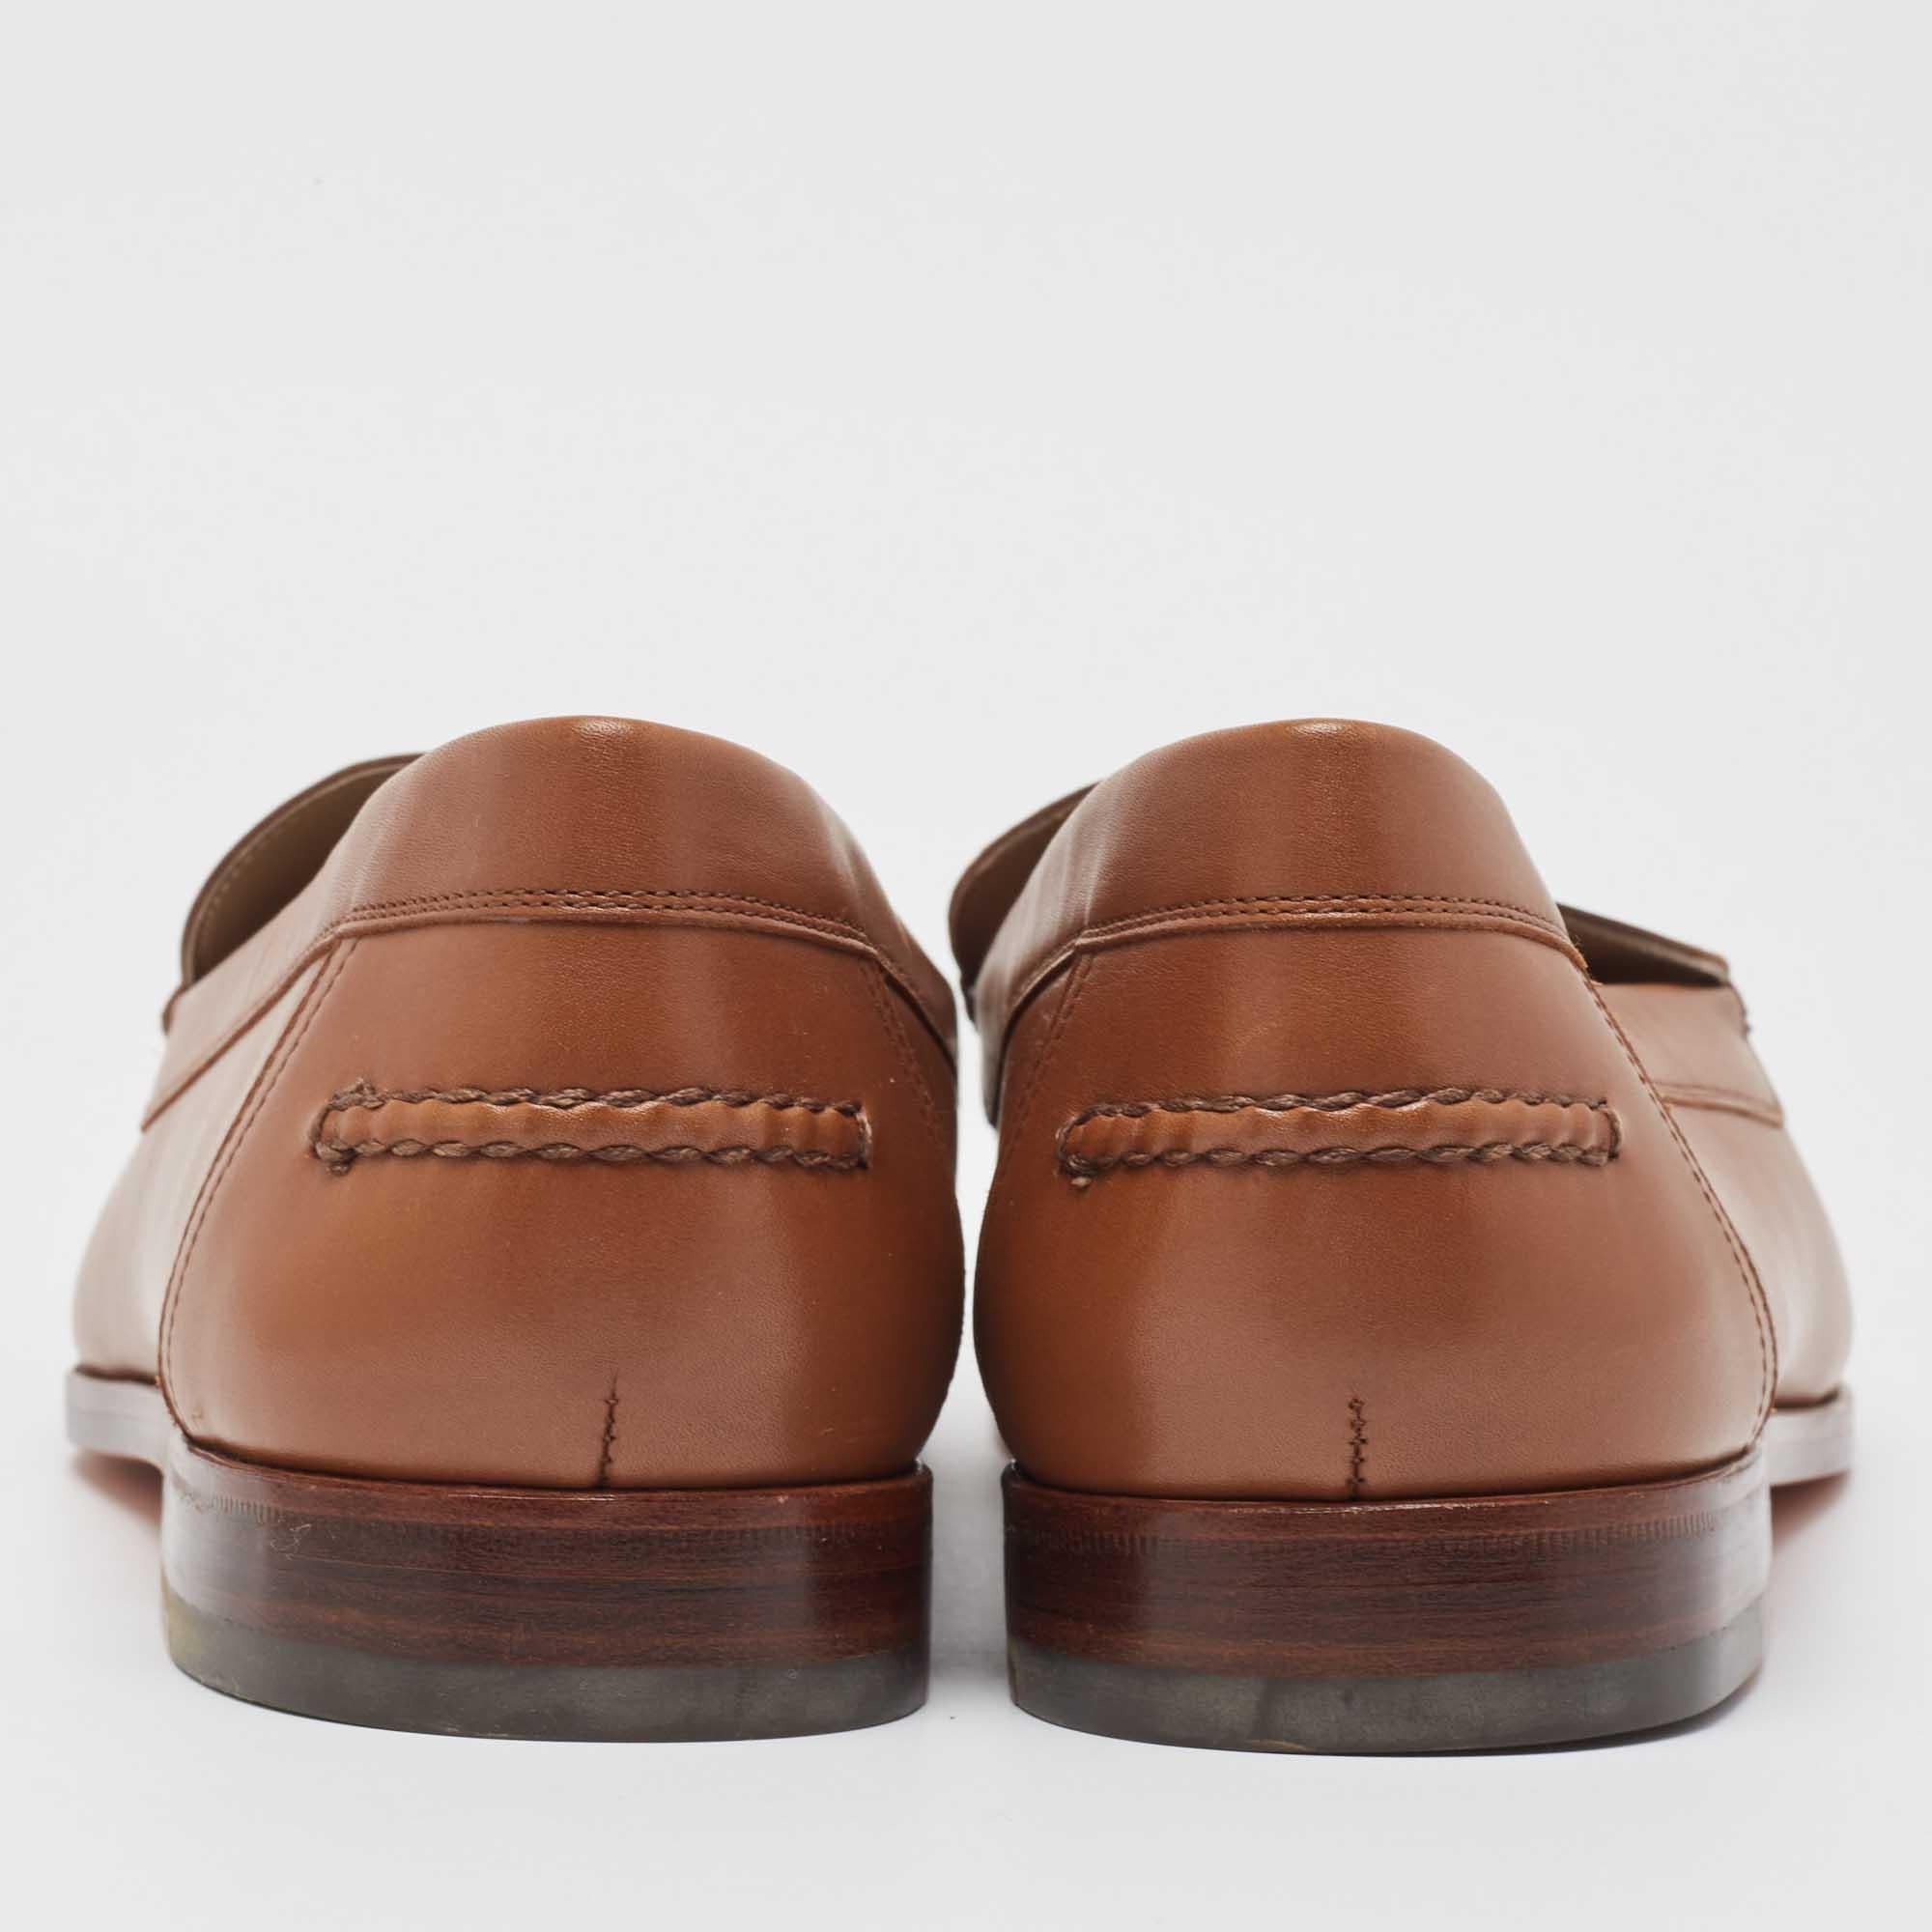 Practical, fashionable, and durable—these Hermès loafers are carefully built to be fine companions to your everyday style. They come made using the best materials to be a prized buy.

Includes: Original Dustbag